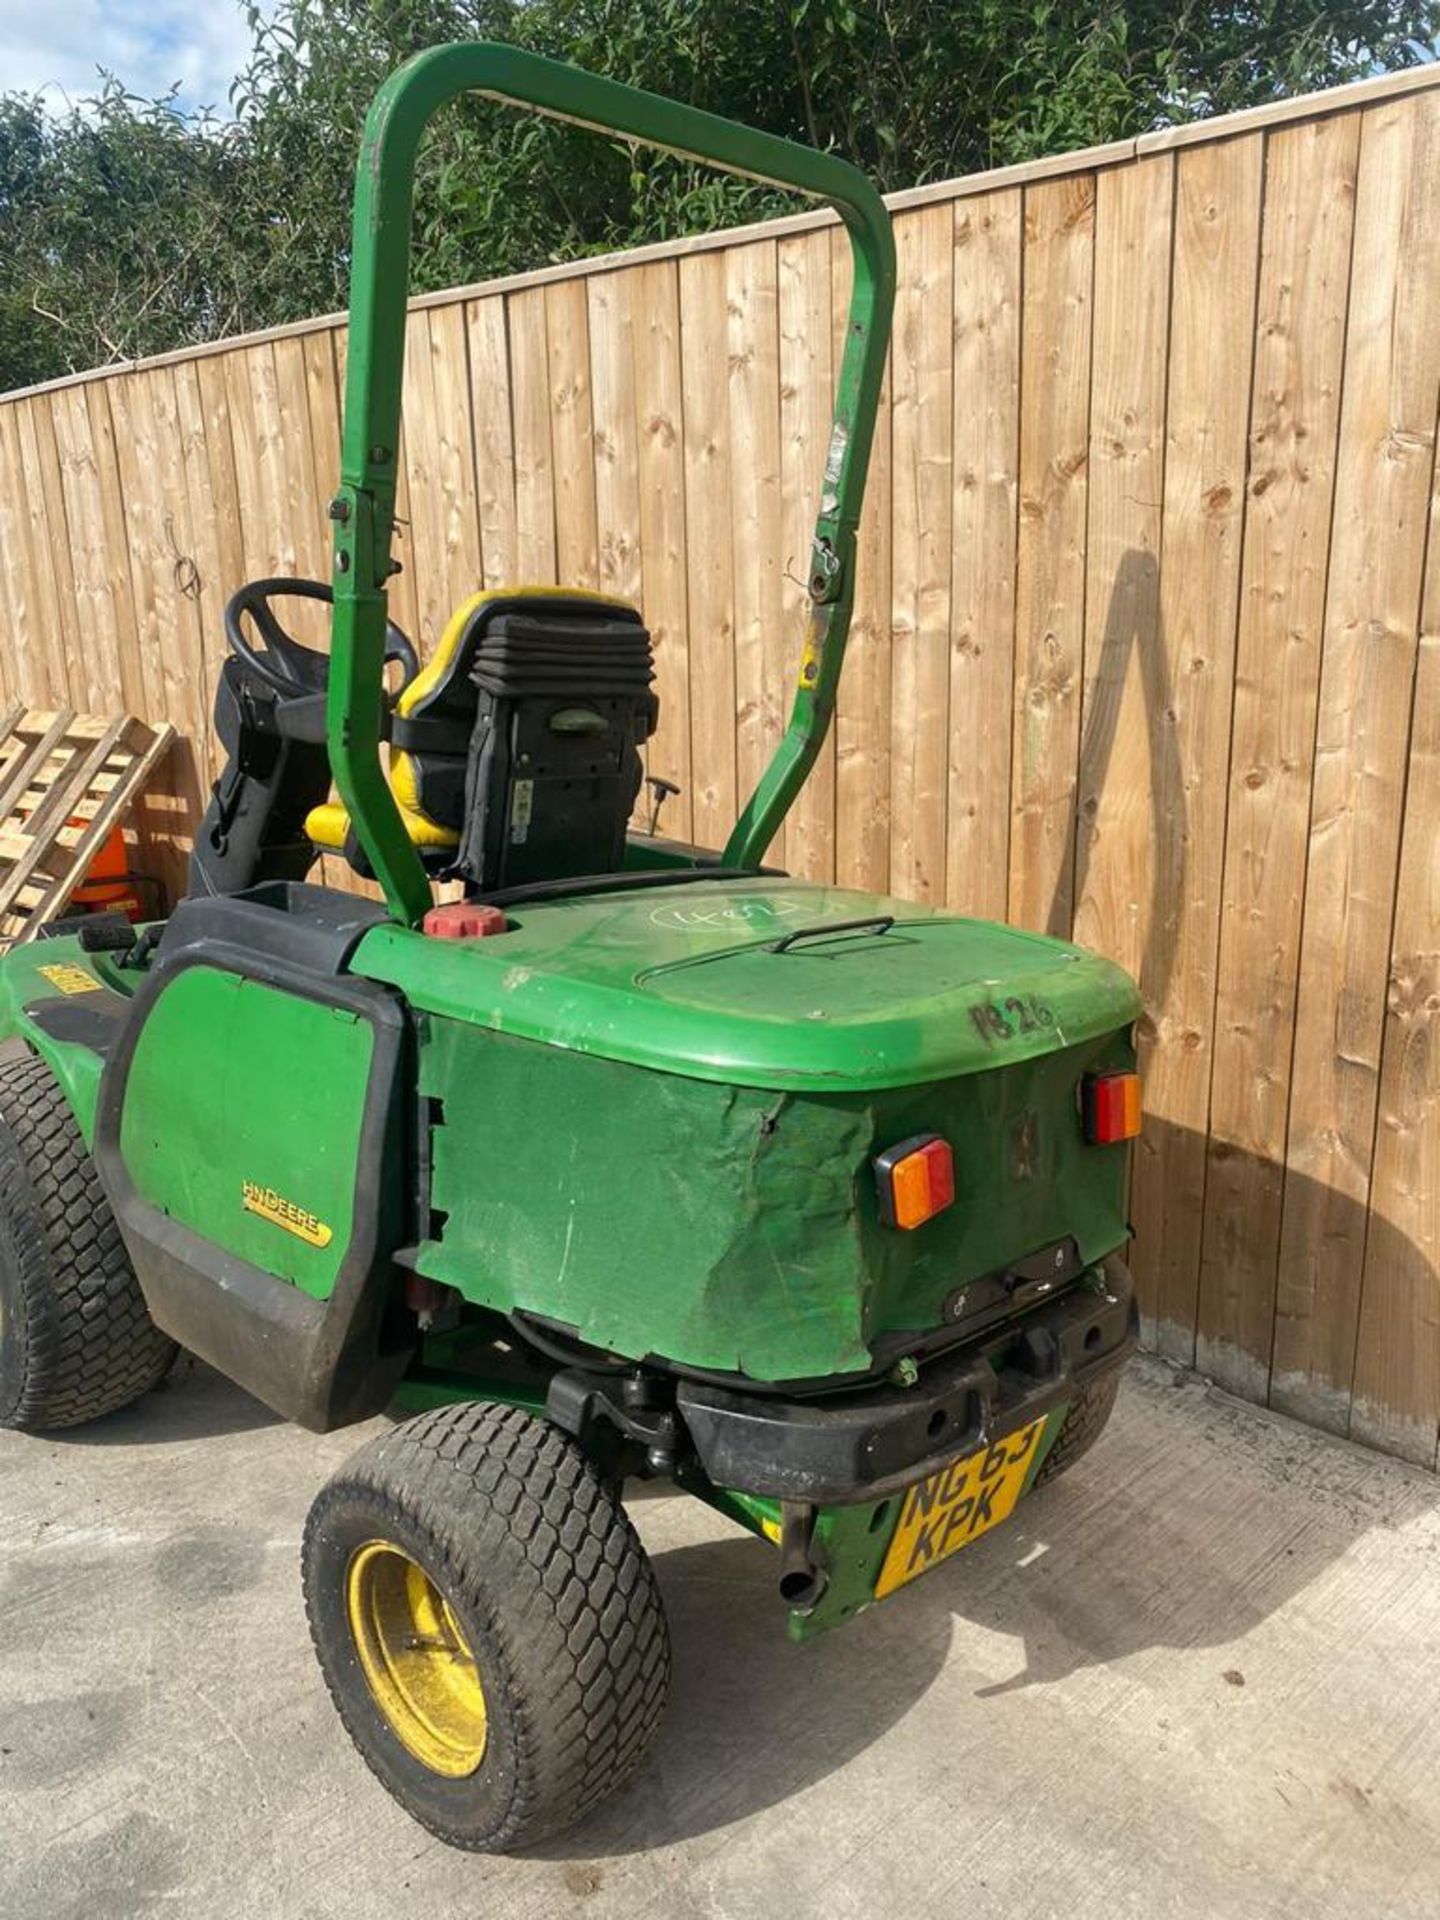 2013 "63" JOHN DEERE 1545 OUTFRONT MOWER LOCATION: NORTH YORKSHIRE - Image 7 of 8